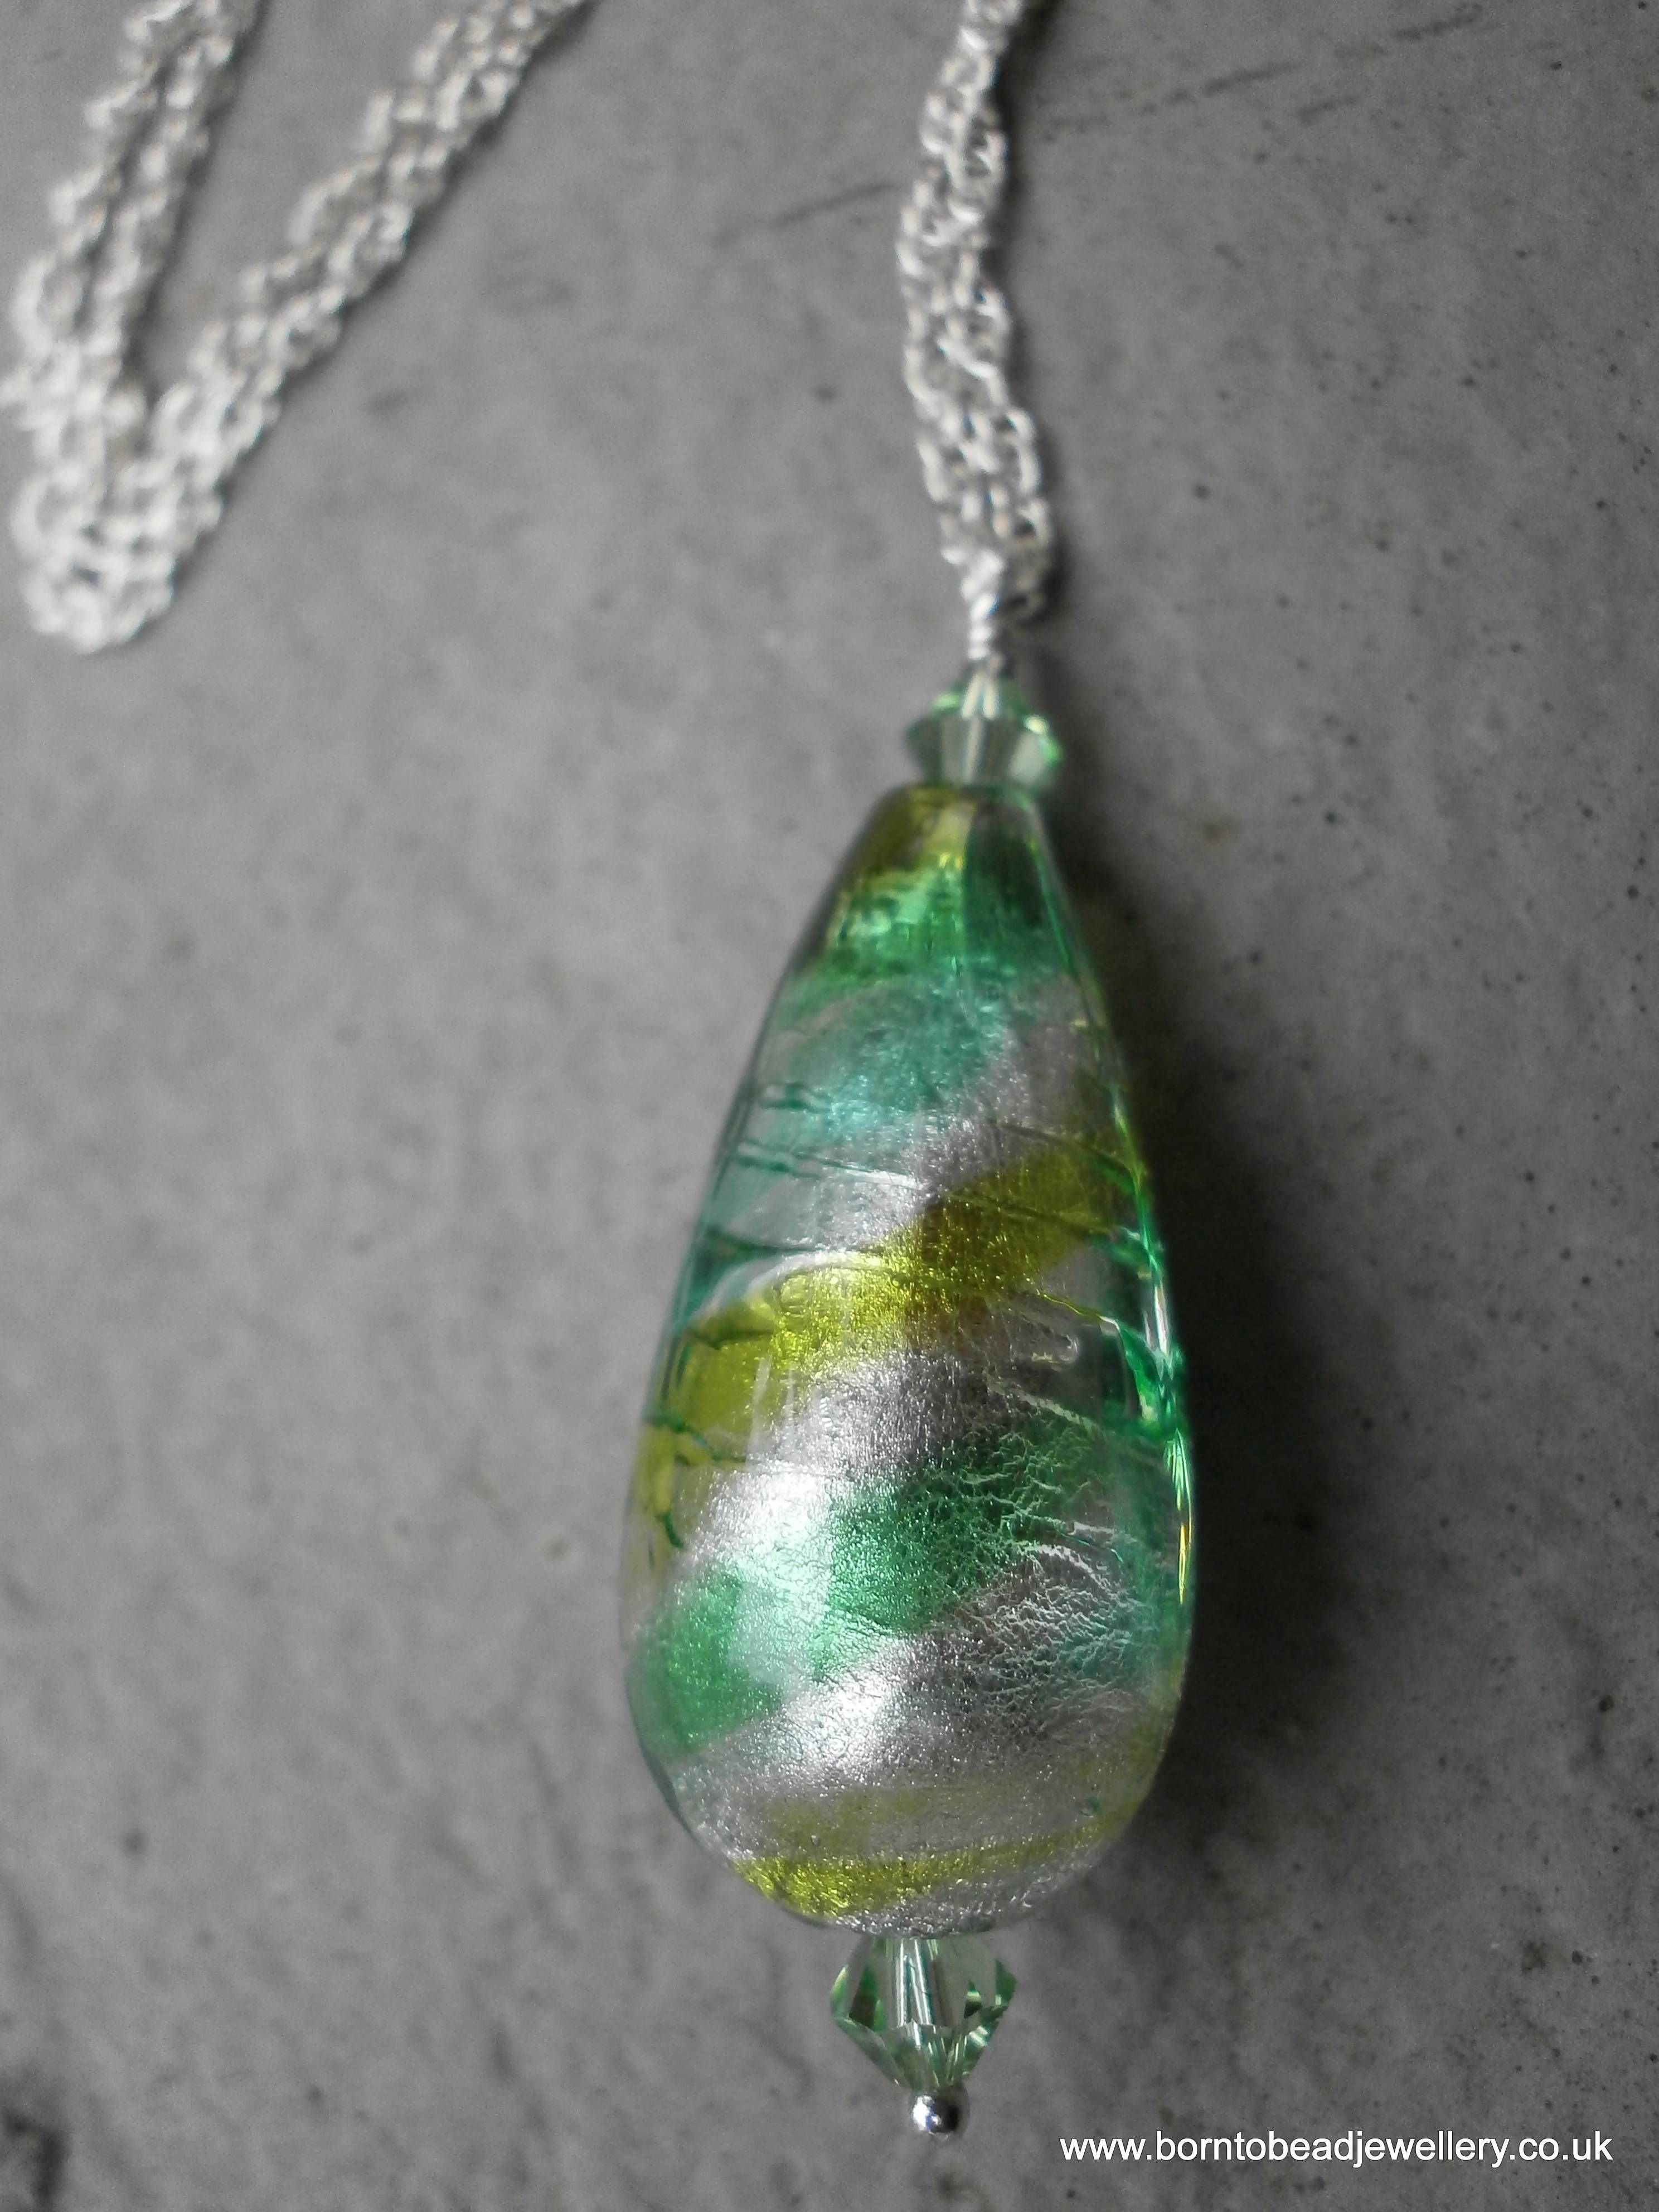 Born To Bead Jewellery – Handmade Jewellery In Crystal And Silver With Regard To Venetian Glass Pendants (View 12 of 15)